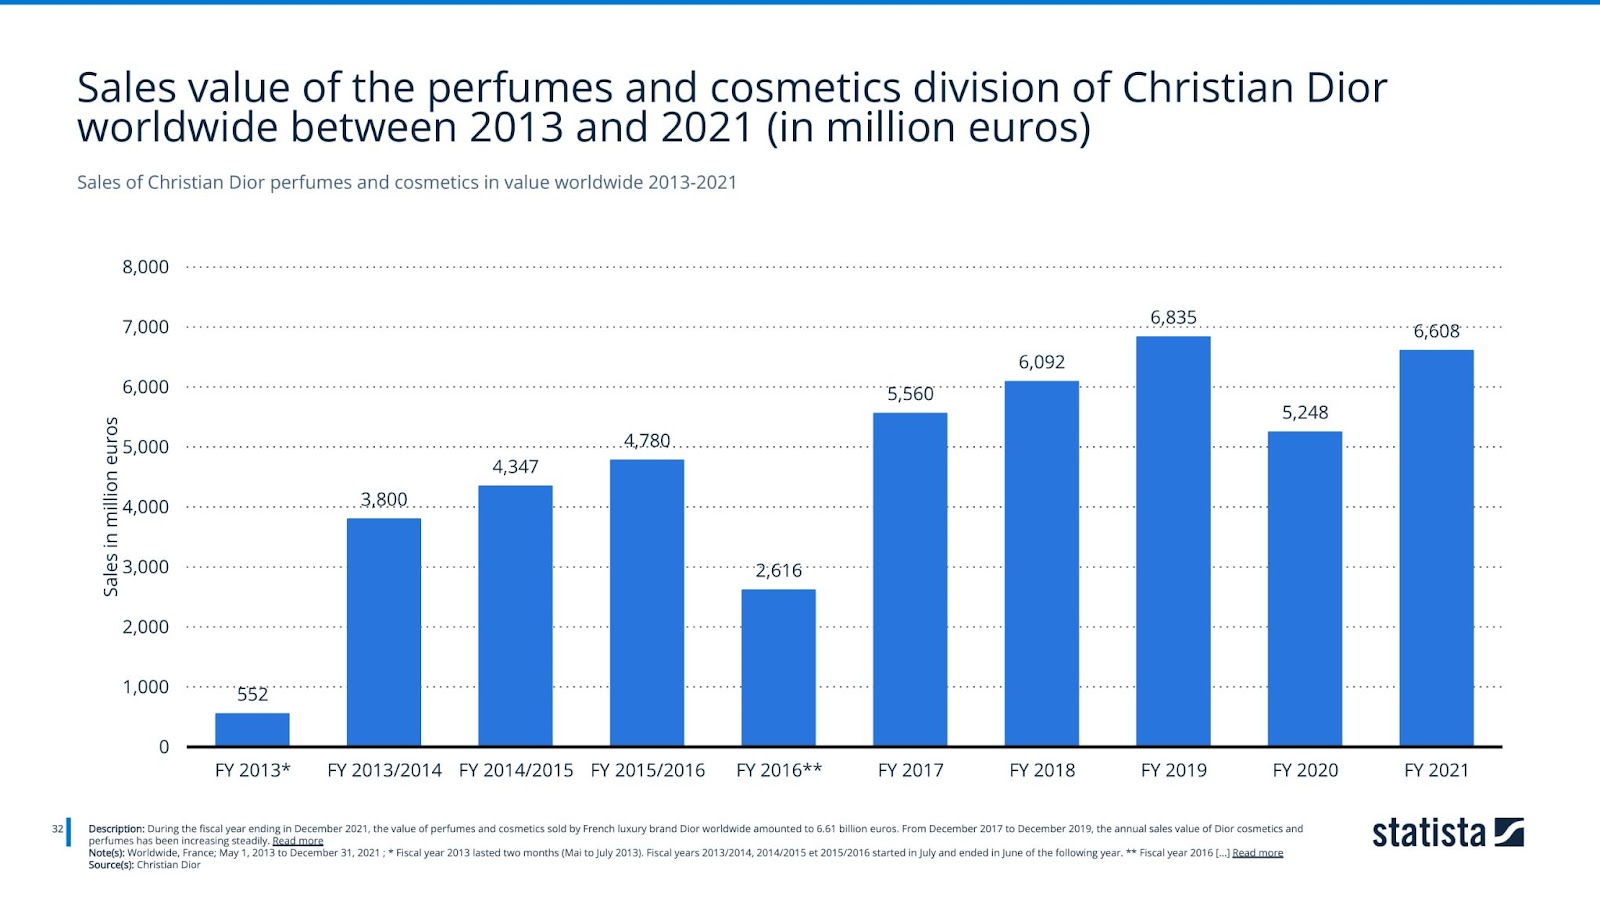 Sales of Christian Dior perfumes and cosmetics in value worldwide 2013-2021